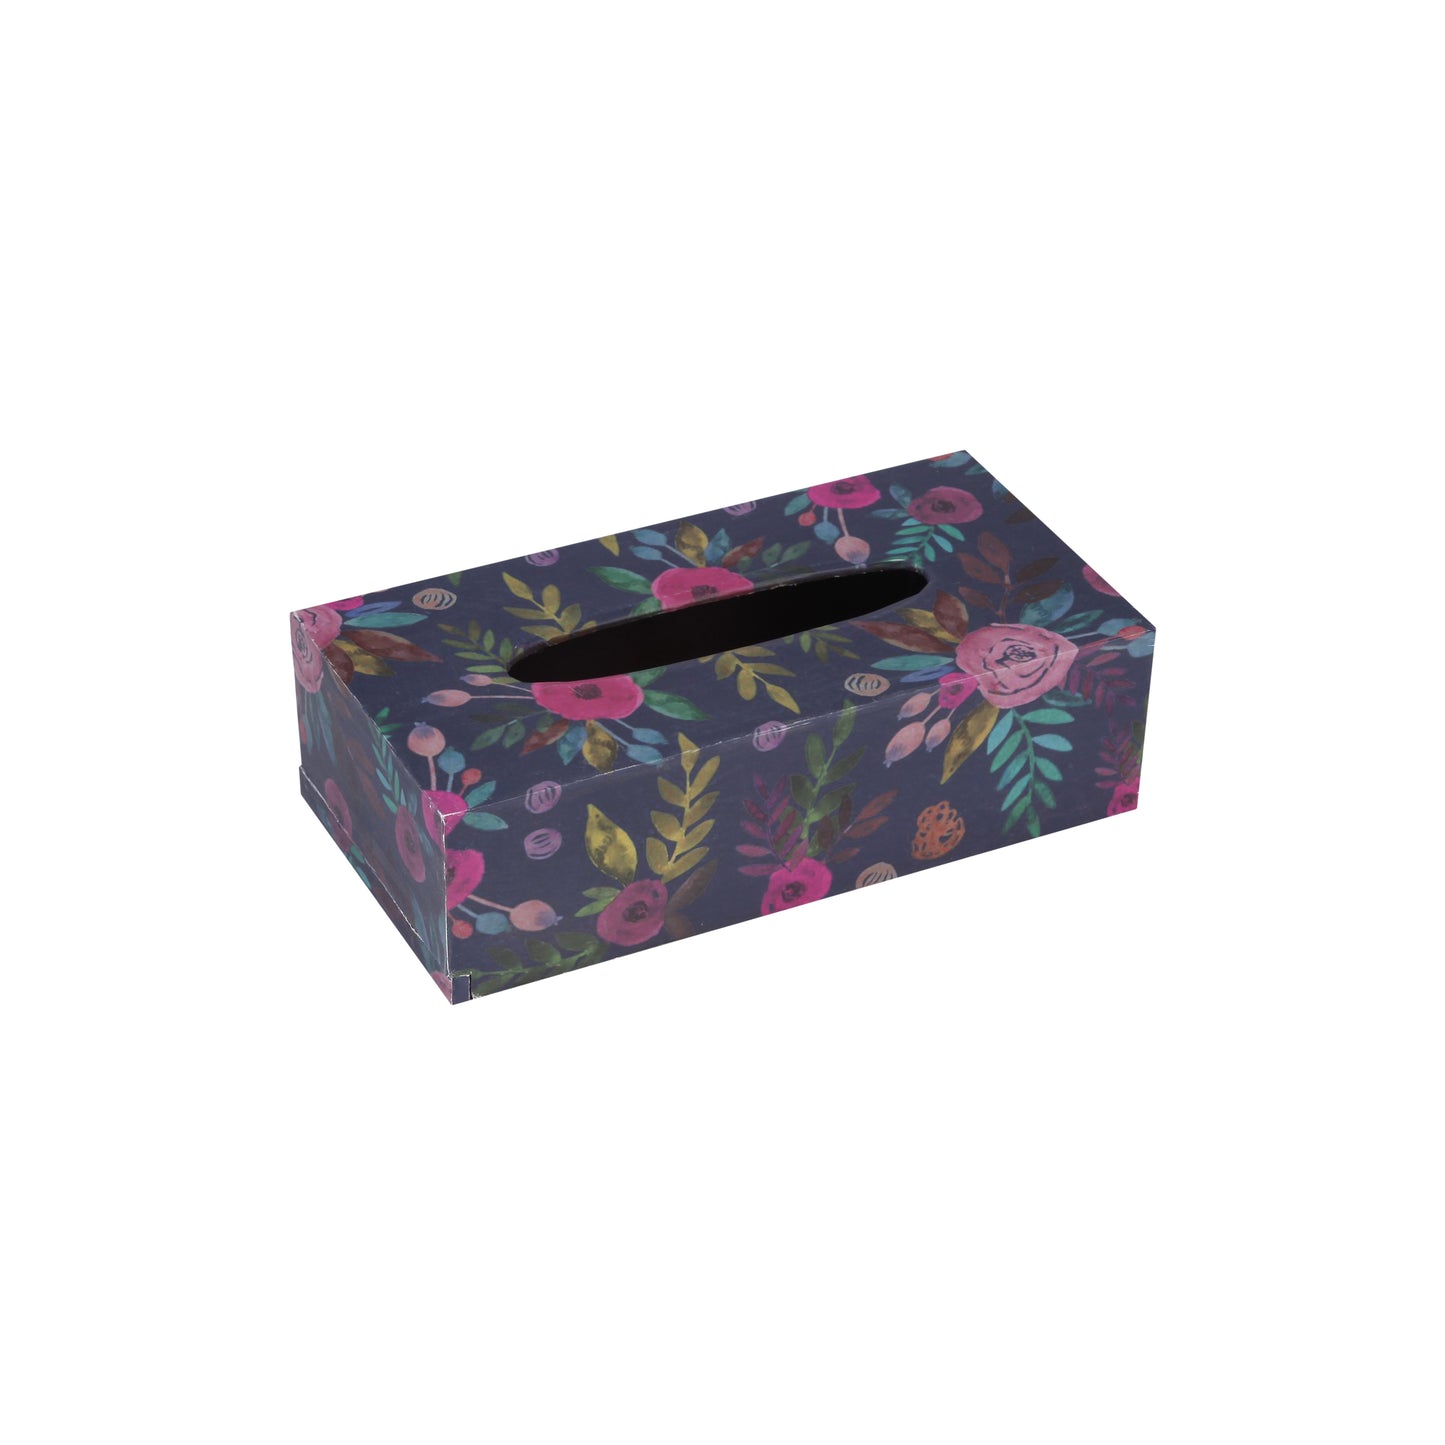 A Tiny Mistake Blue Floral Pattern Rectangle Tissue Box, 26 x 13 x 8 cm